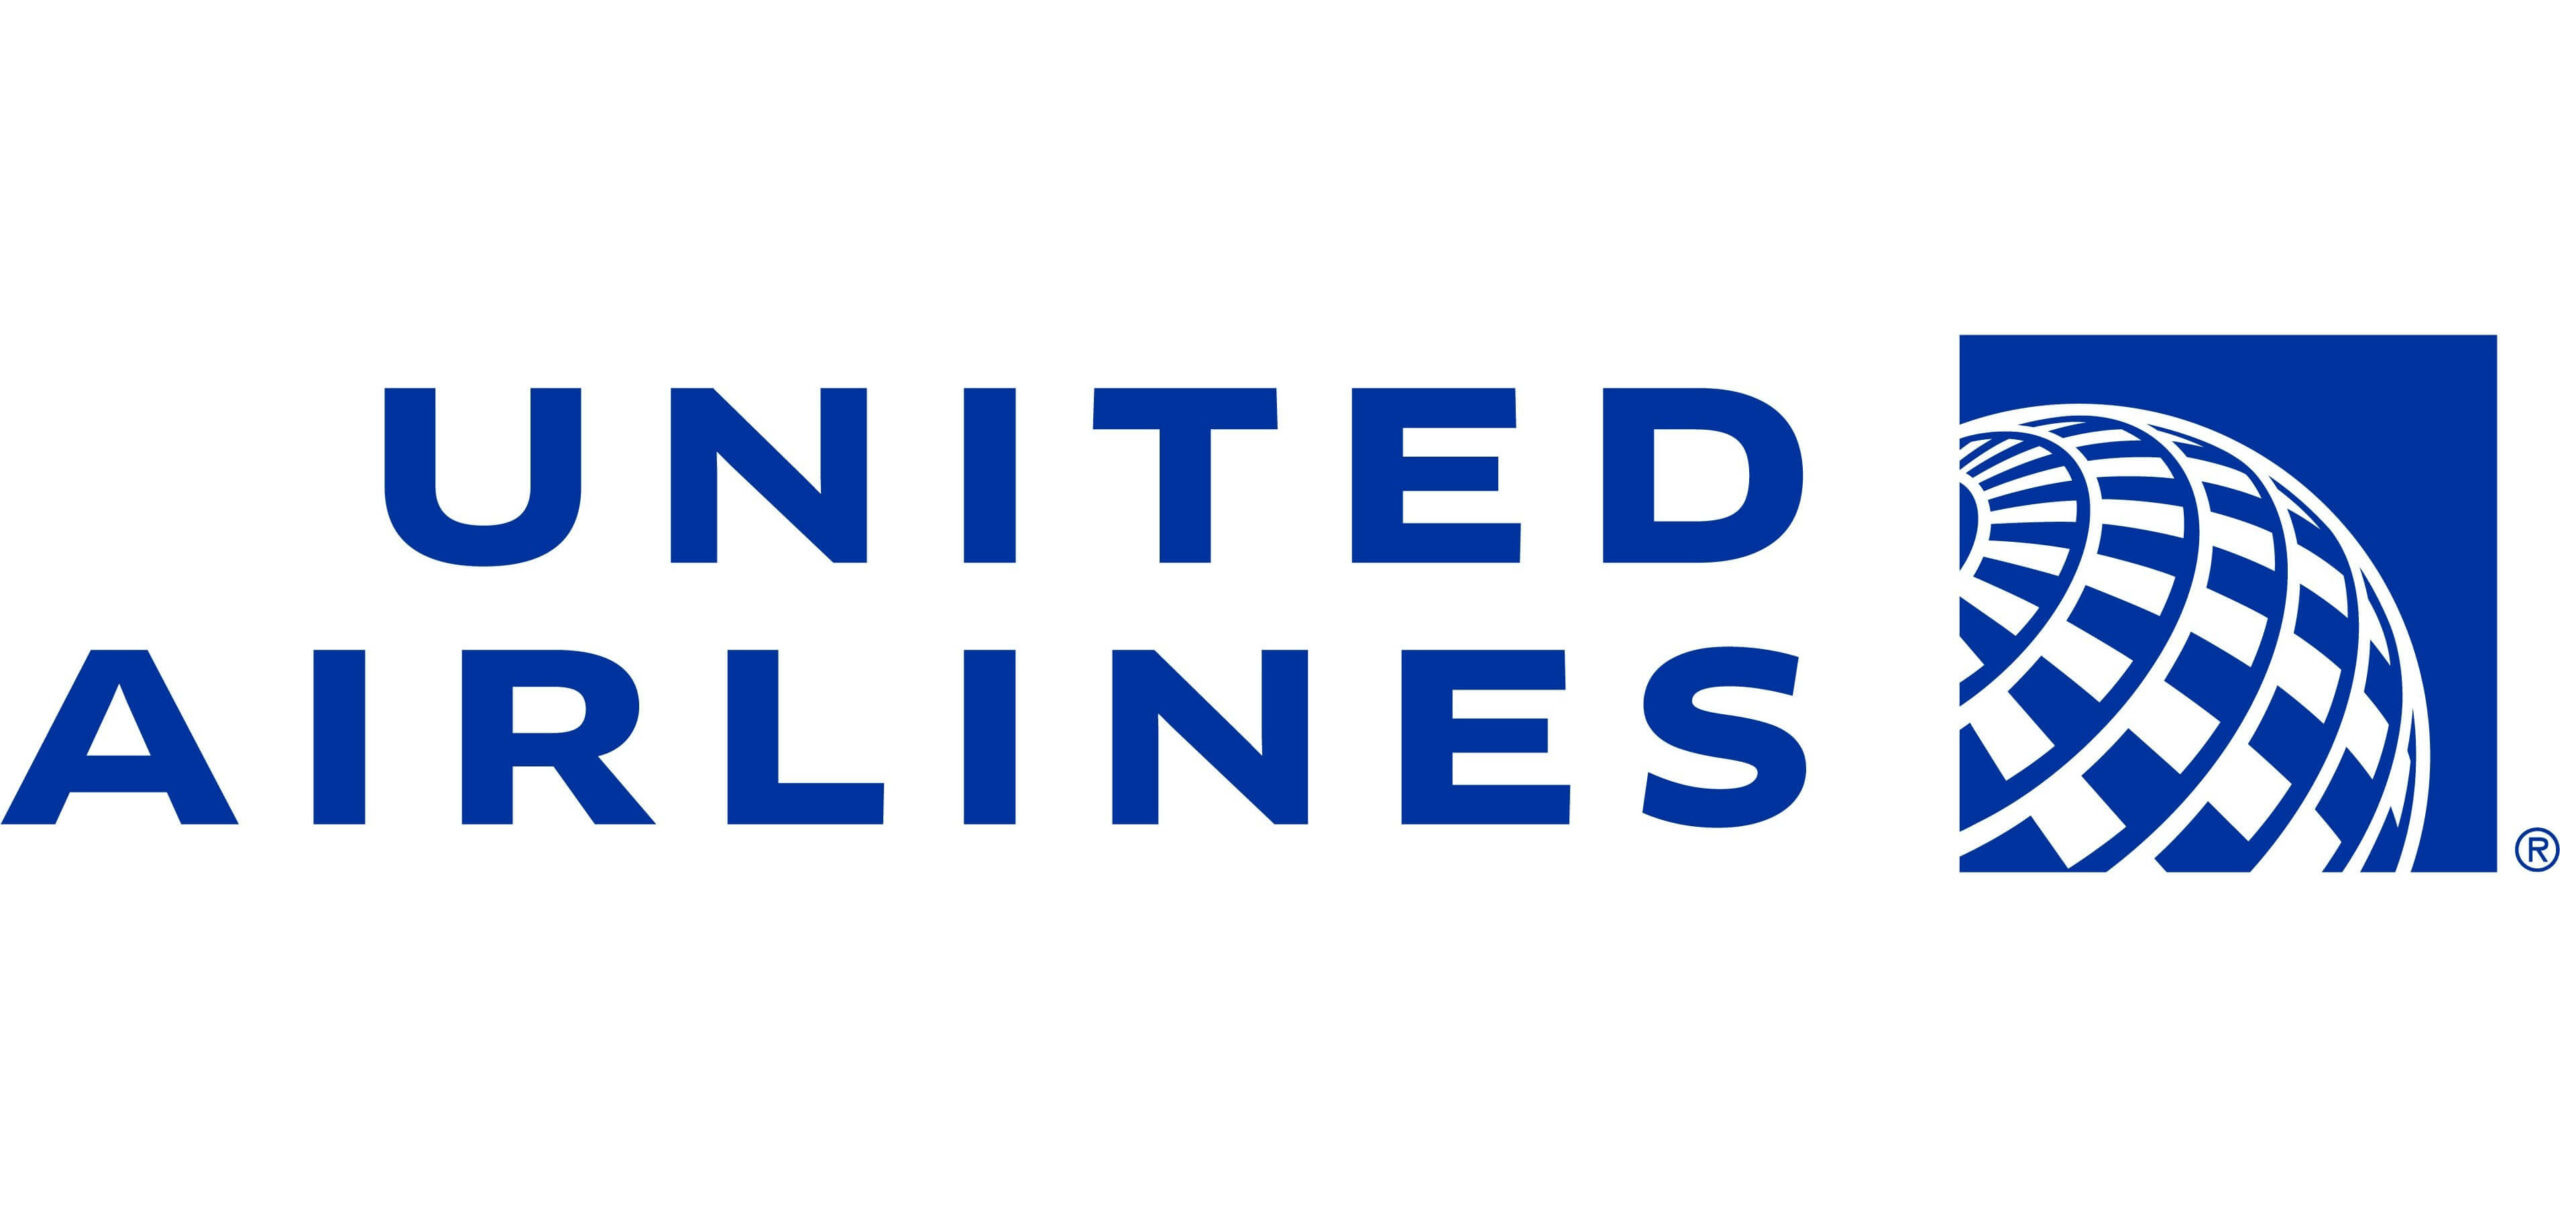 United Airlines: Customer Service, Flight Bookings and Flight Changes